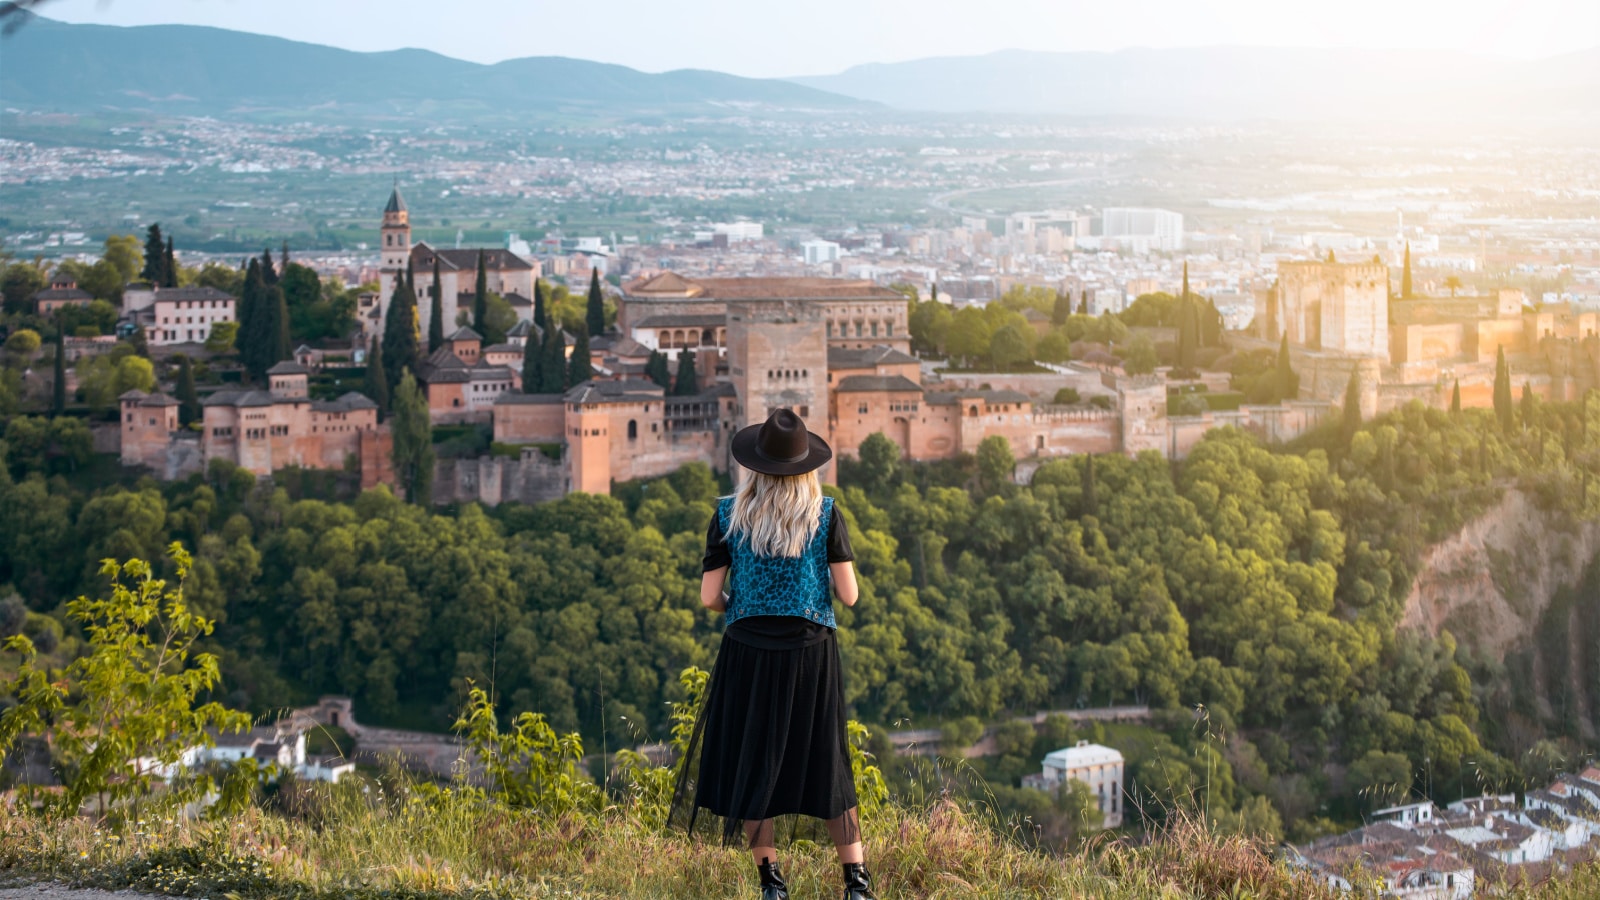 A young female traveler with sunglasses and casual style contemplates the views of the Alhambra palace in the city of Granada, Spain